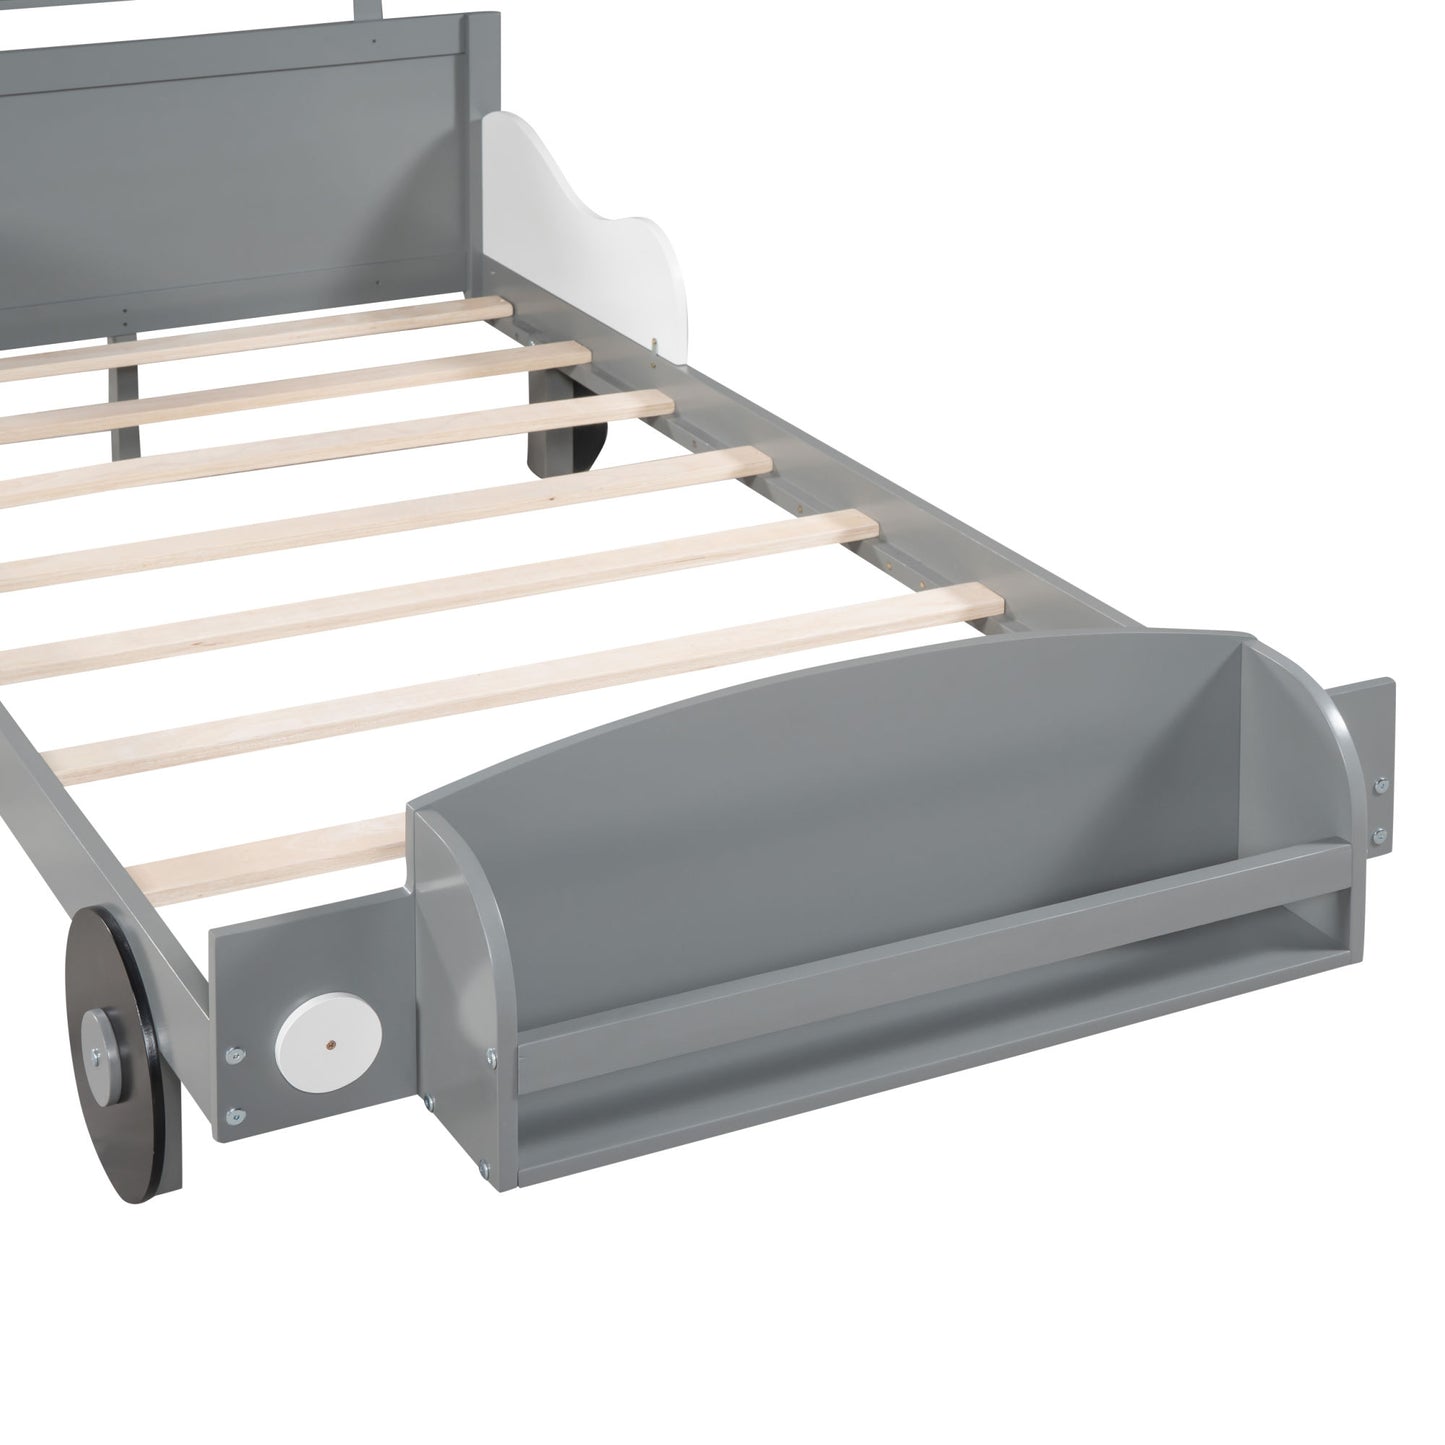 twin size car-shaped platform bed, gray